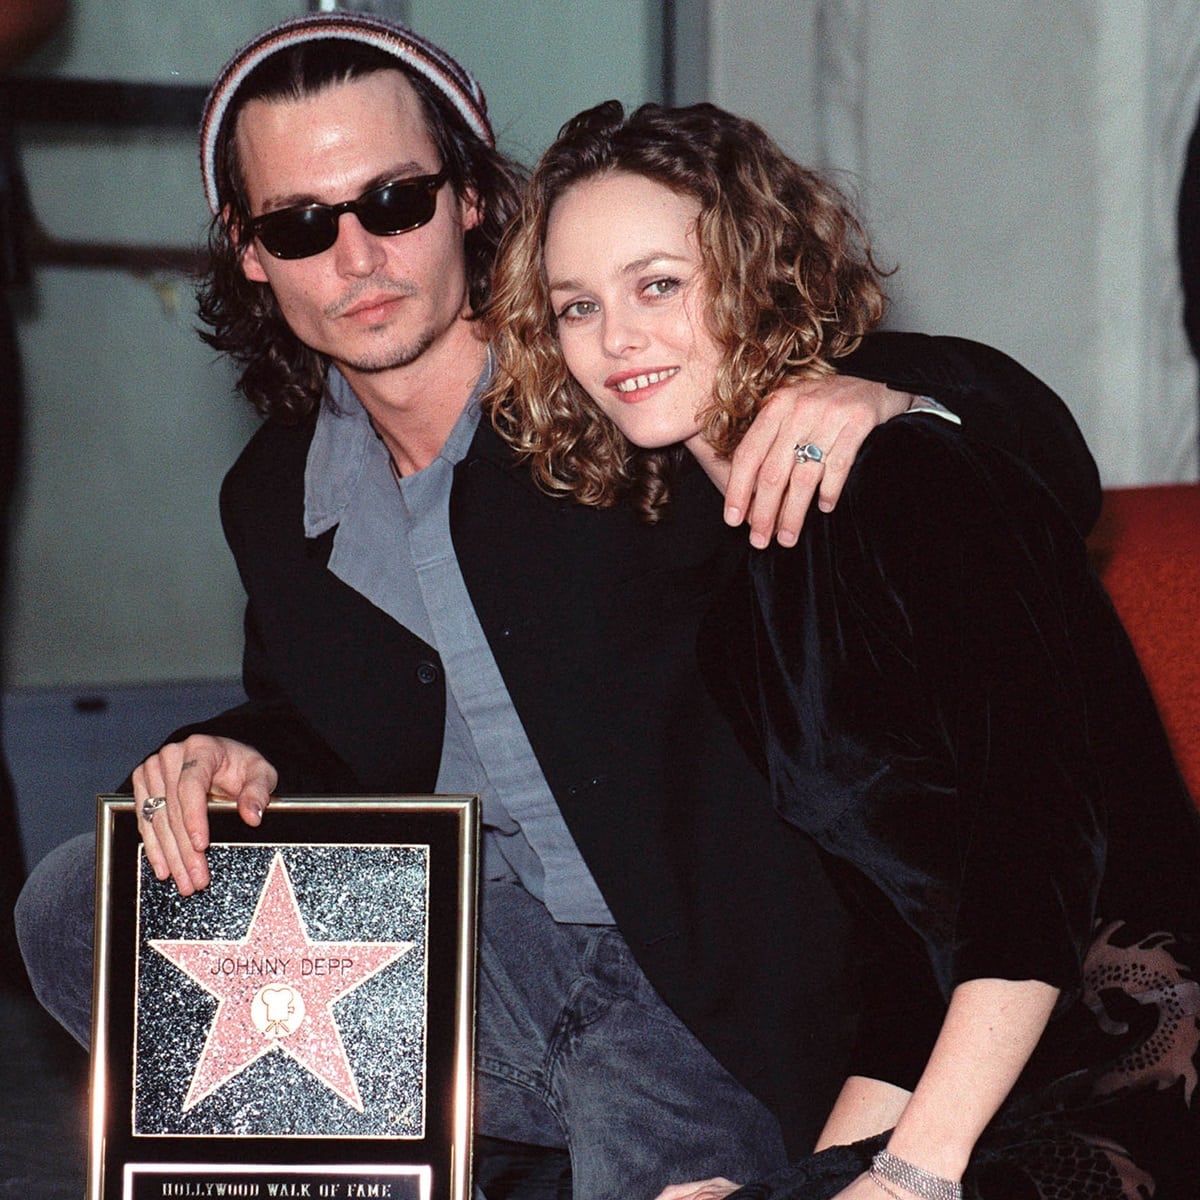 Johnny Depp once said that he loved Vanessa Paradis's smile, even though she had crooked teeth